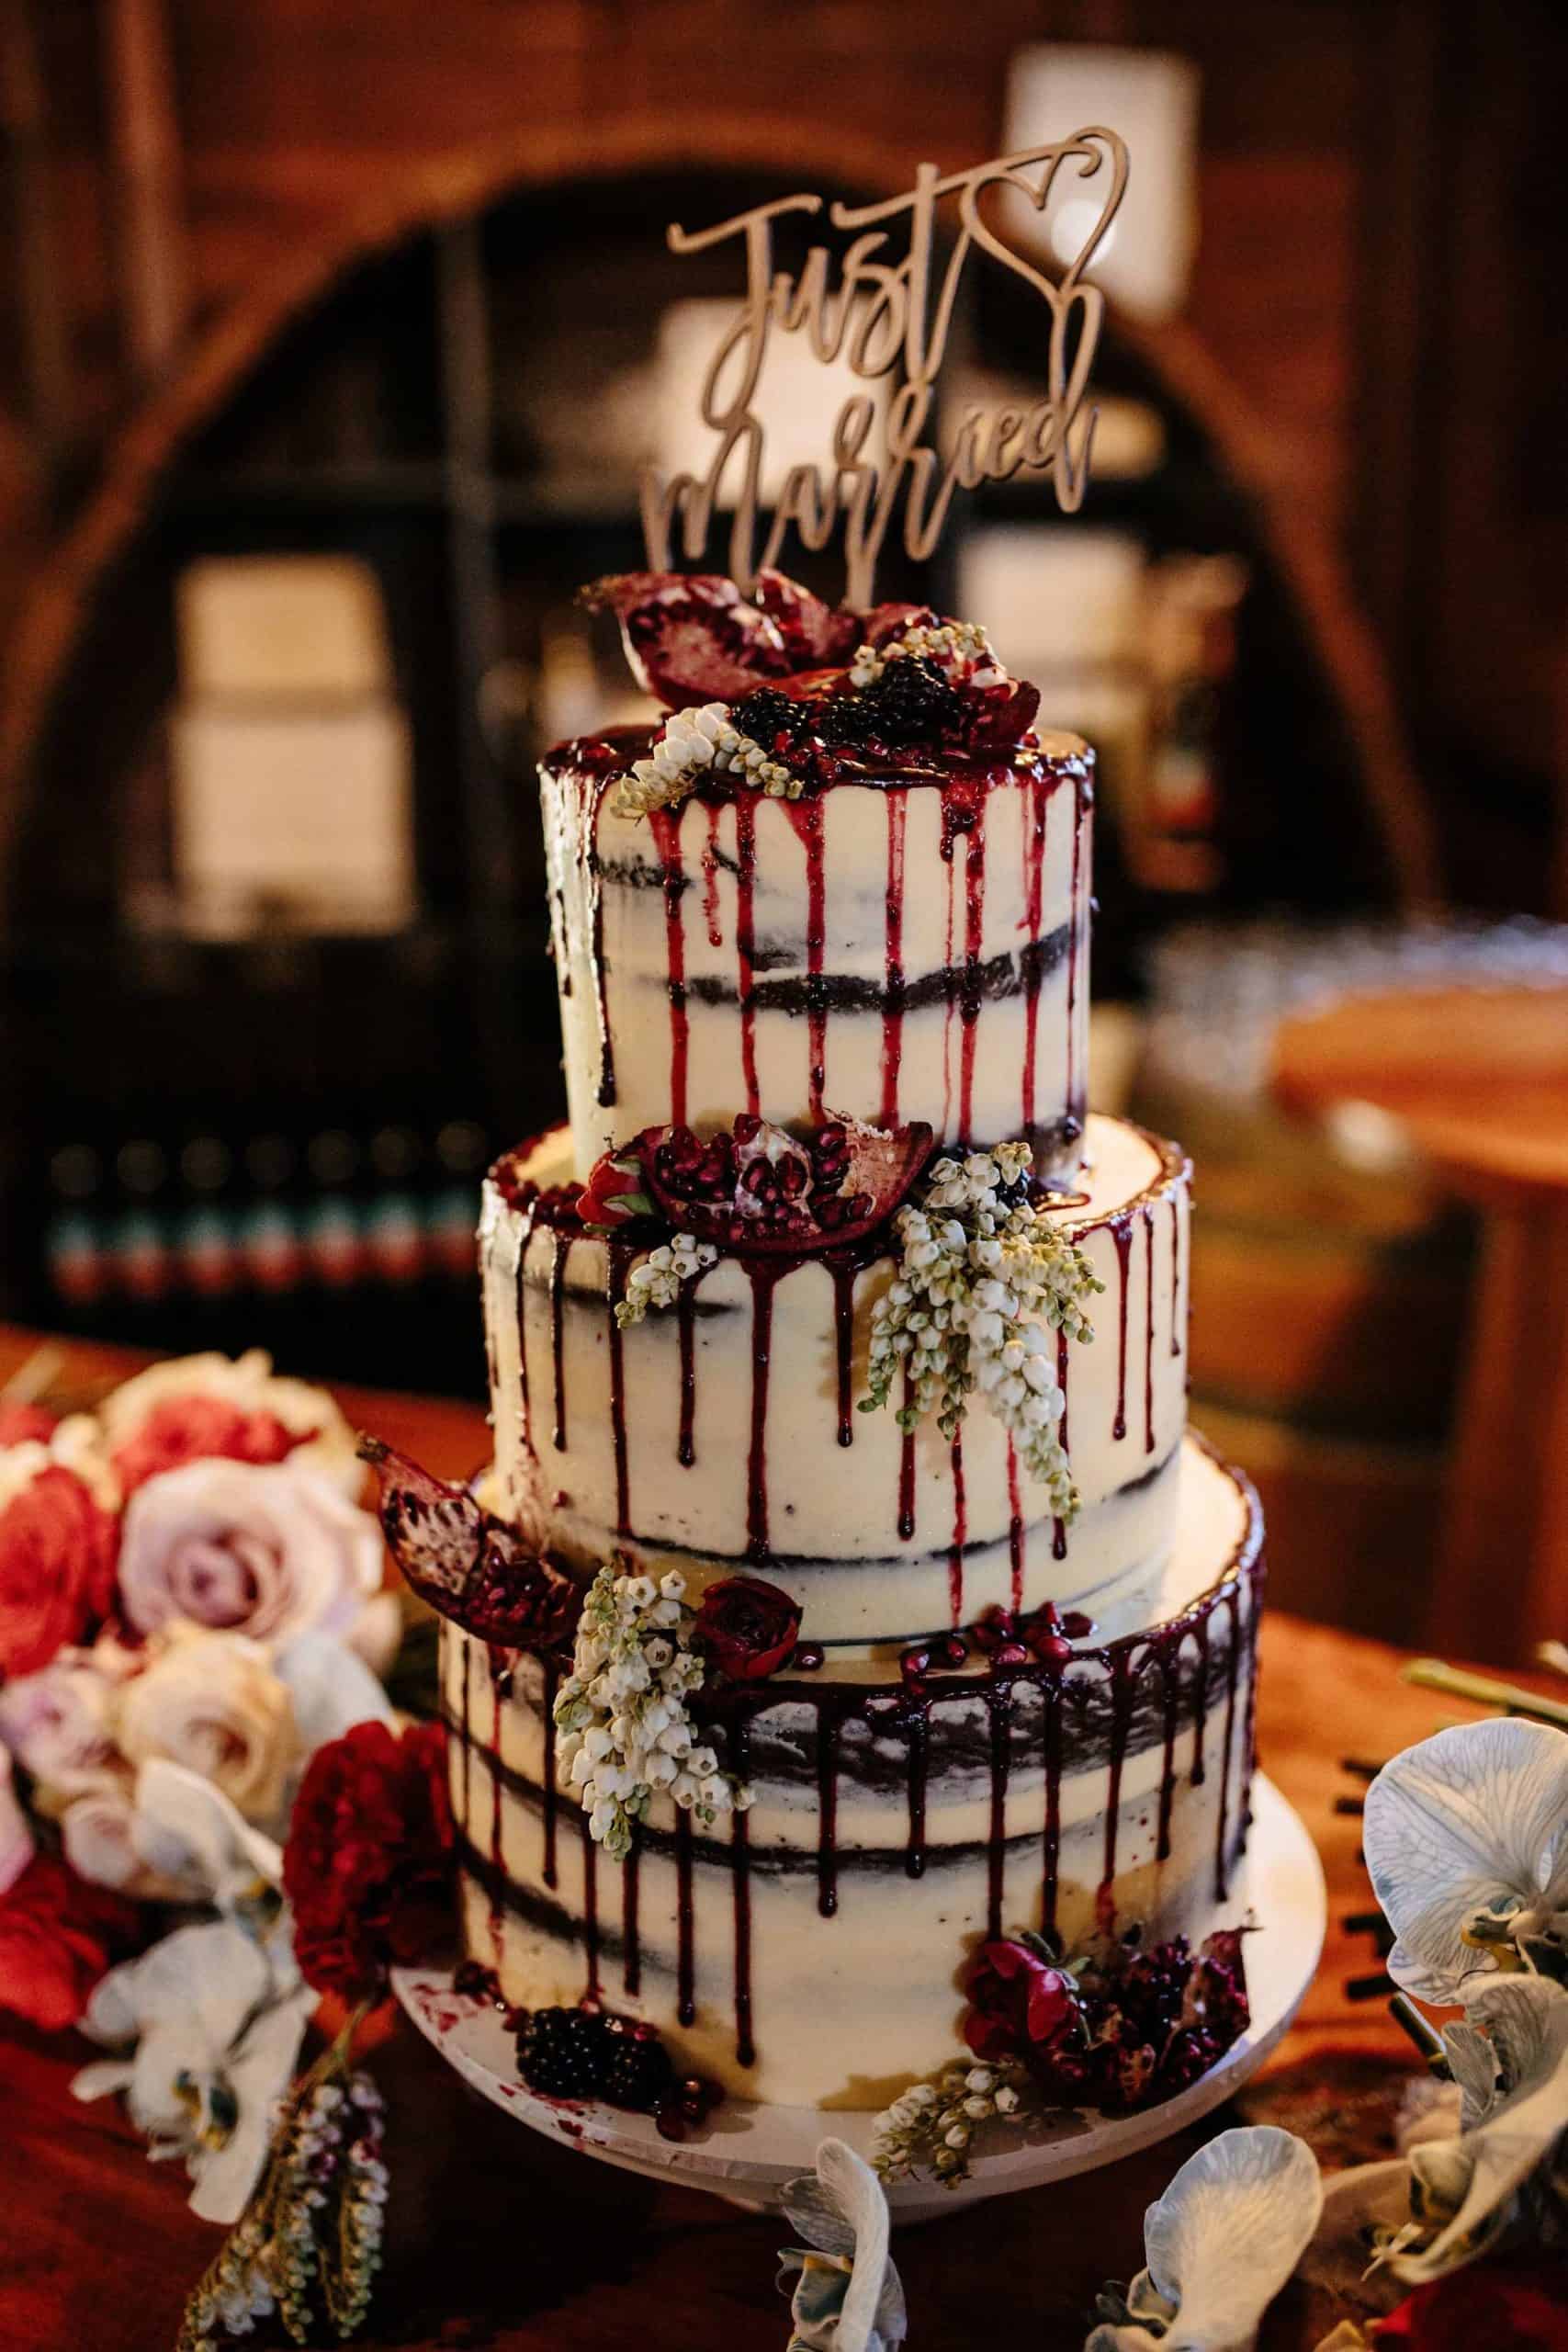 best wedding cakes of 2019 - 3 tier chocolate cake with berry drizzle